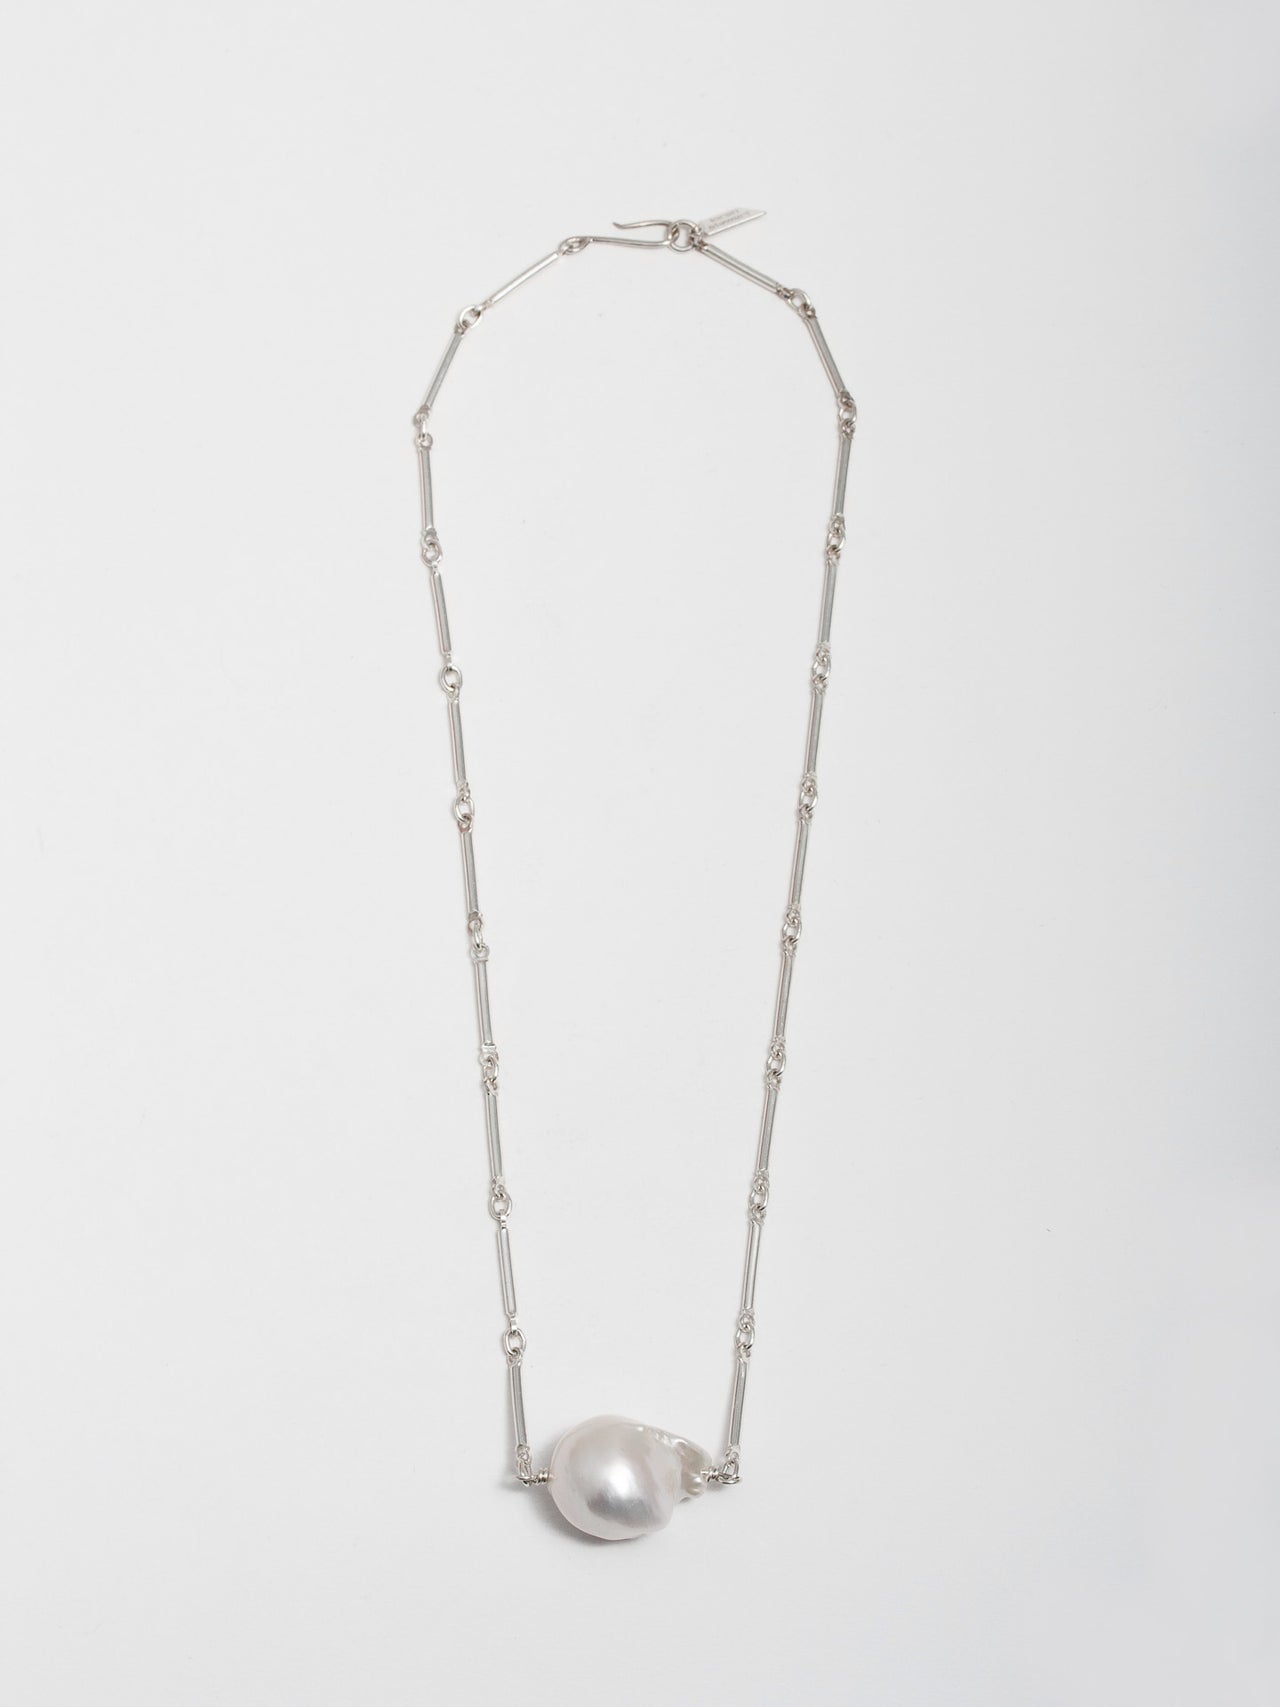 Sterling Silver Bar Link Chain & Pearl Necklace pictured on light grey background. 